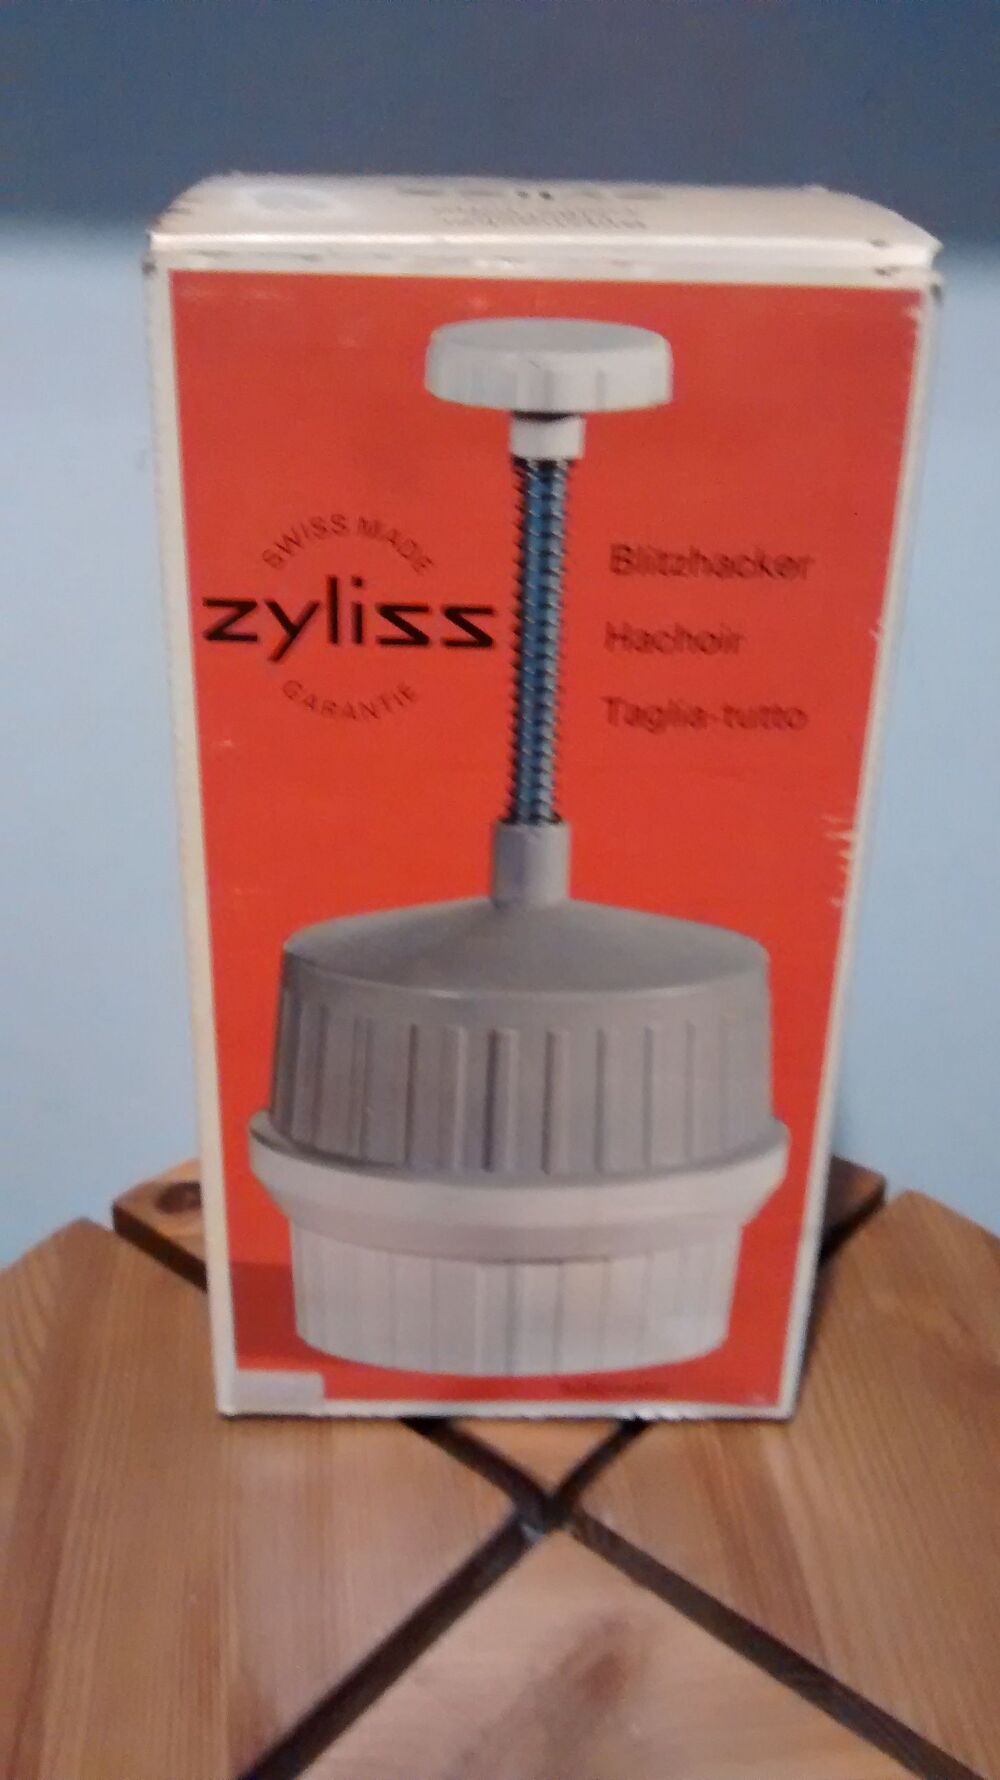 Hachoir zyliss Electromnager